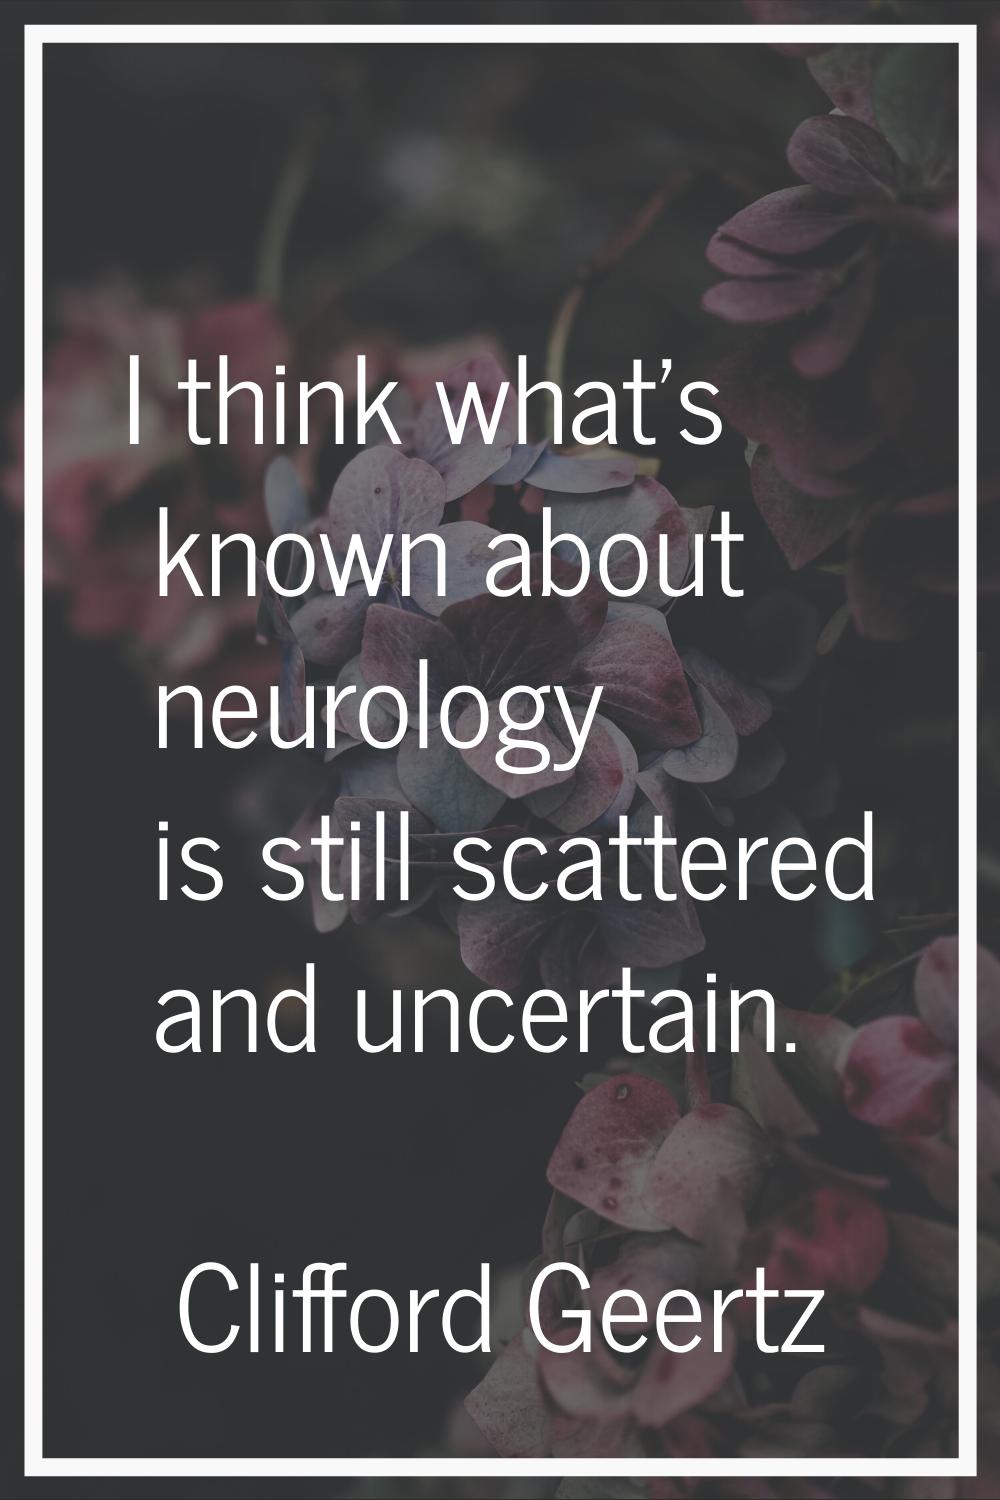 I think what's known about neurology is still scattered and uncertain.